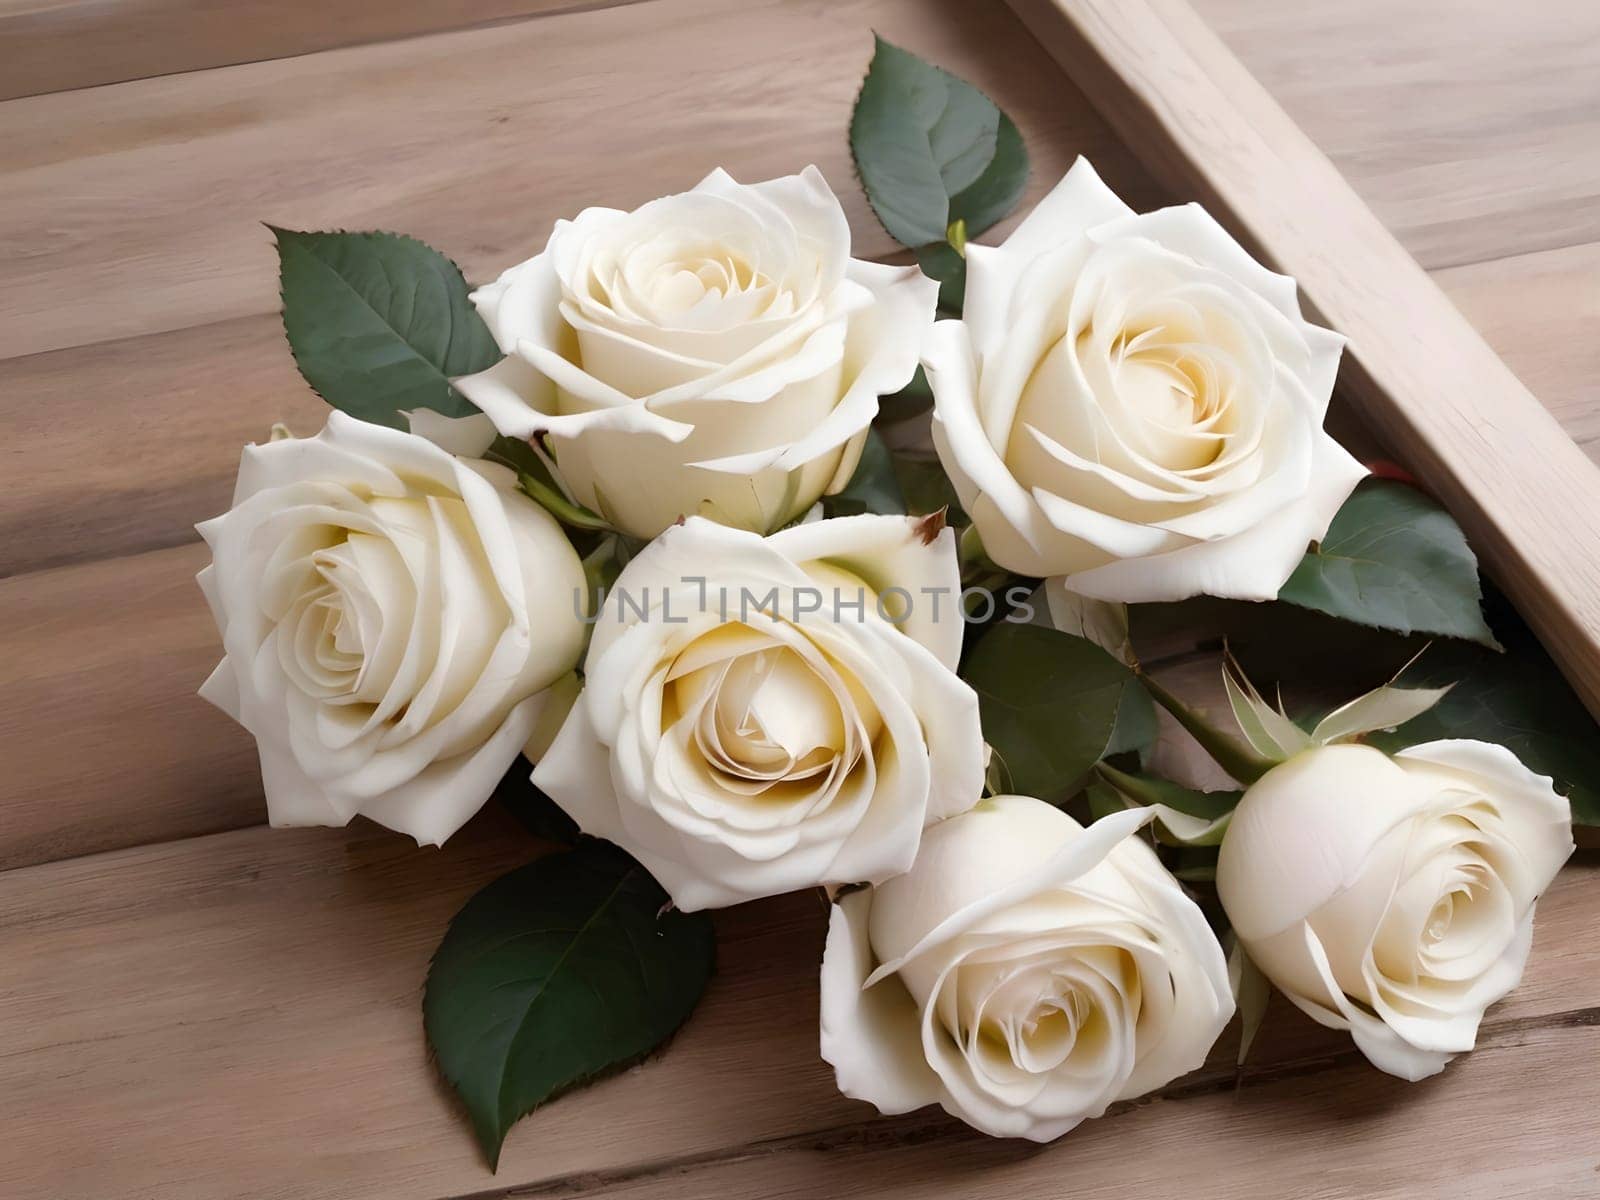 Wooden Serenity. Framed White Roses Creating a Timeless Display.